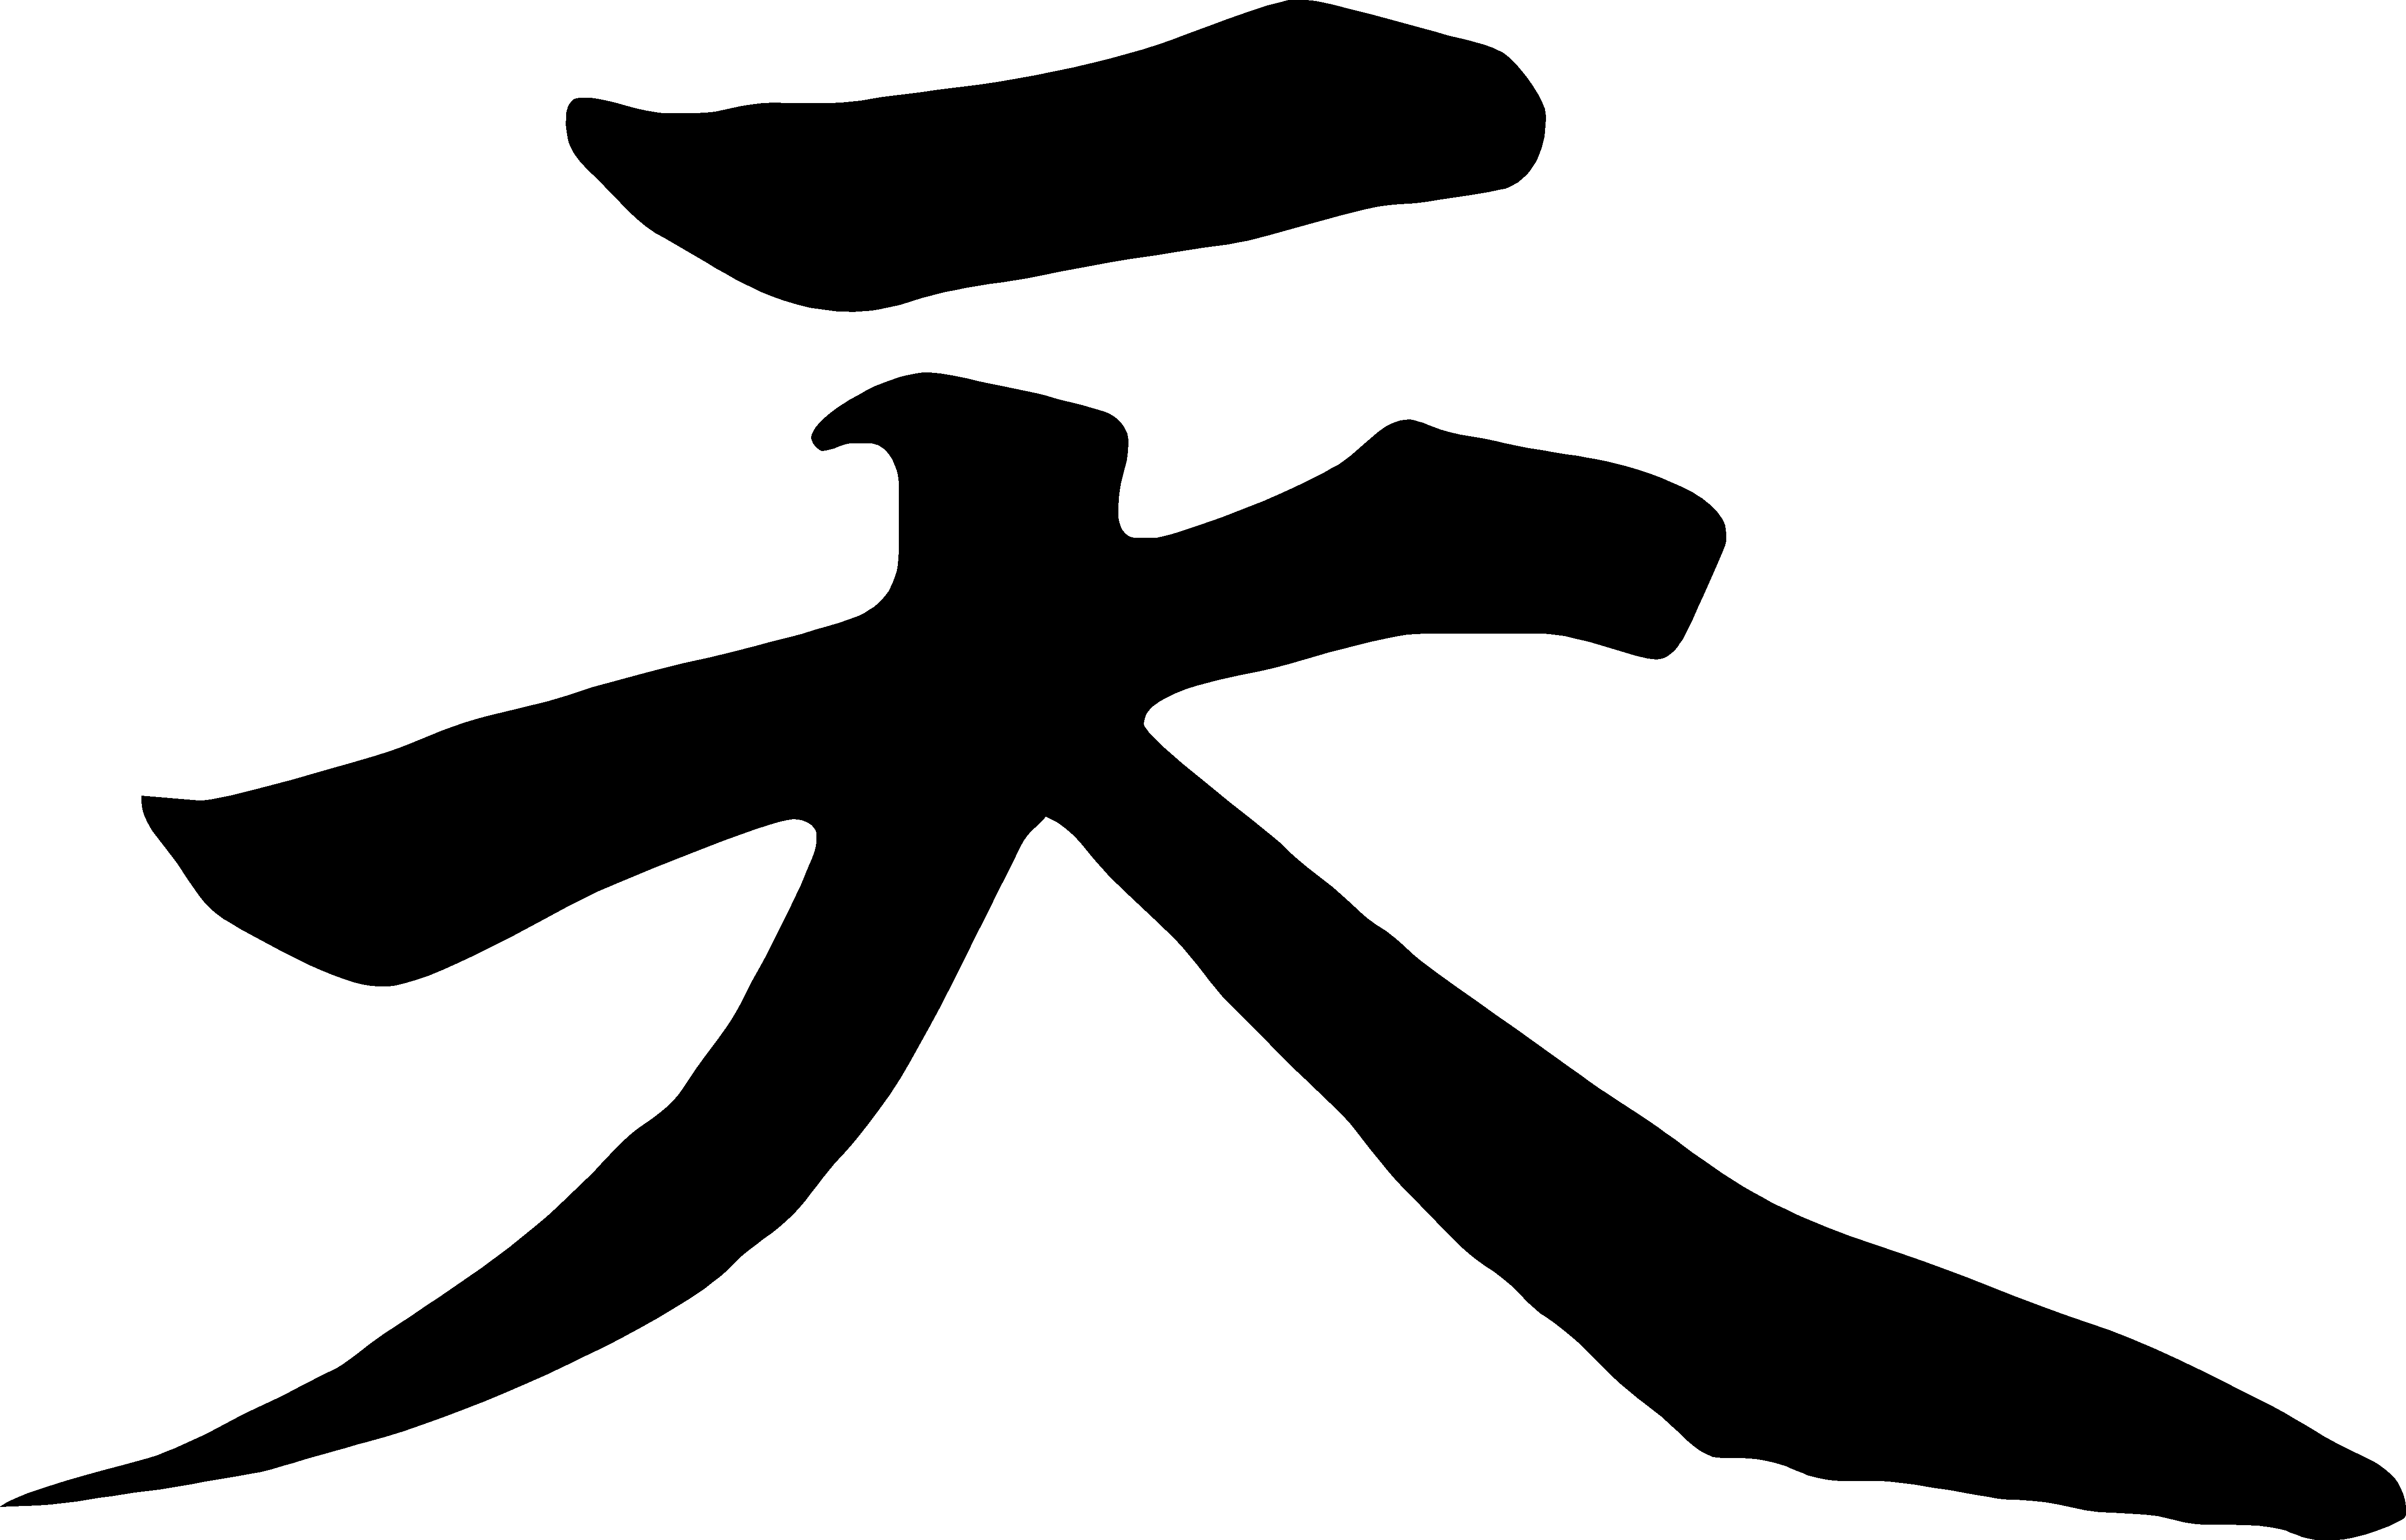 Japanese Symbol Of Peace - ClipArt Best